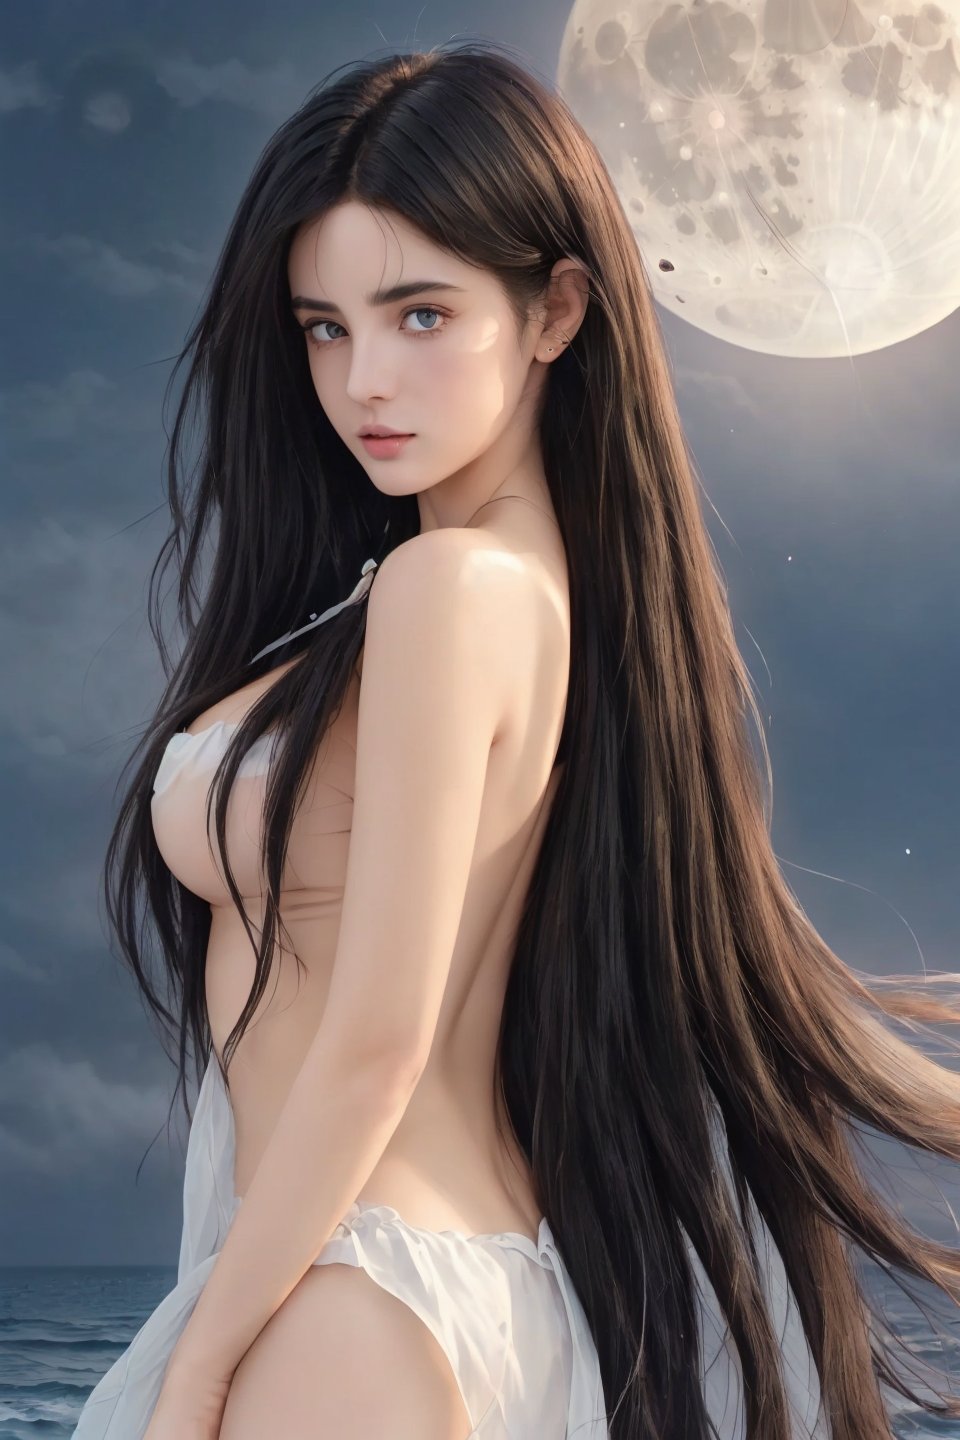 ((High resolution)), ((Fine detail)), (High-definition CG), HDR, (glowing:1.2), (illustration:1.3), 1girl, wearing flowing sheer, long sheer, clean skin, fair skin, (side back:1.4), (long flowing hair:1.5), (black hair), strong winds, (topless:1.5), medium full shot, (beautiful face), side bangs, (beautifull eyes, details eyes:1.3), dynamic pose, blue and white theme with glowing addition, (super big bright full moon in all background:1.2), (tele zoom:1.5),
